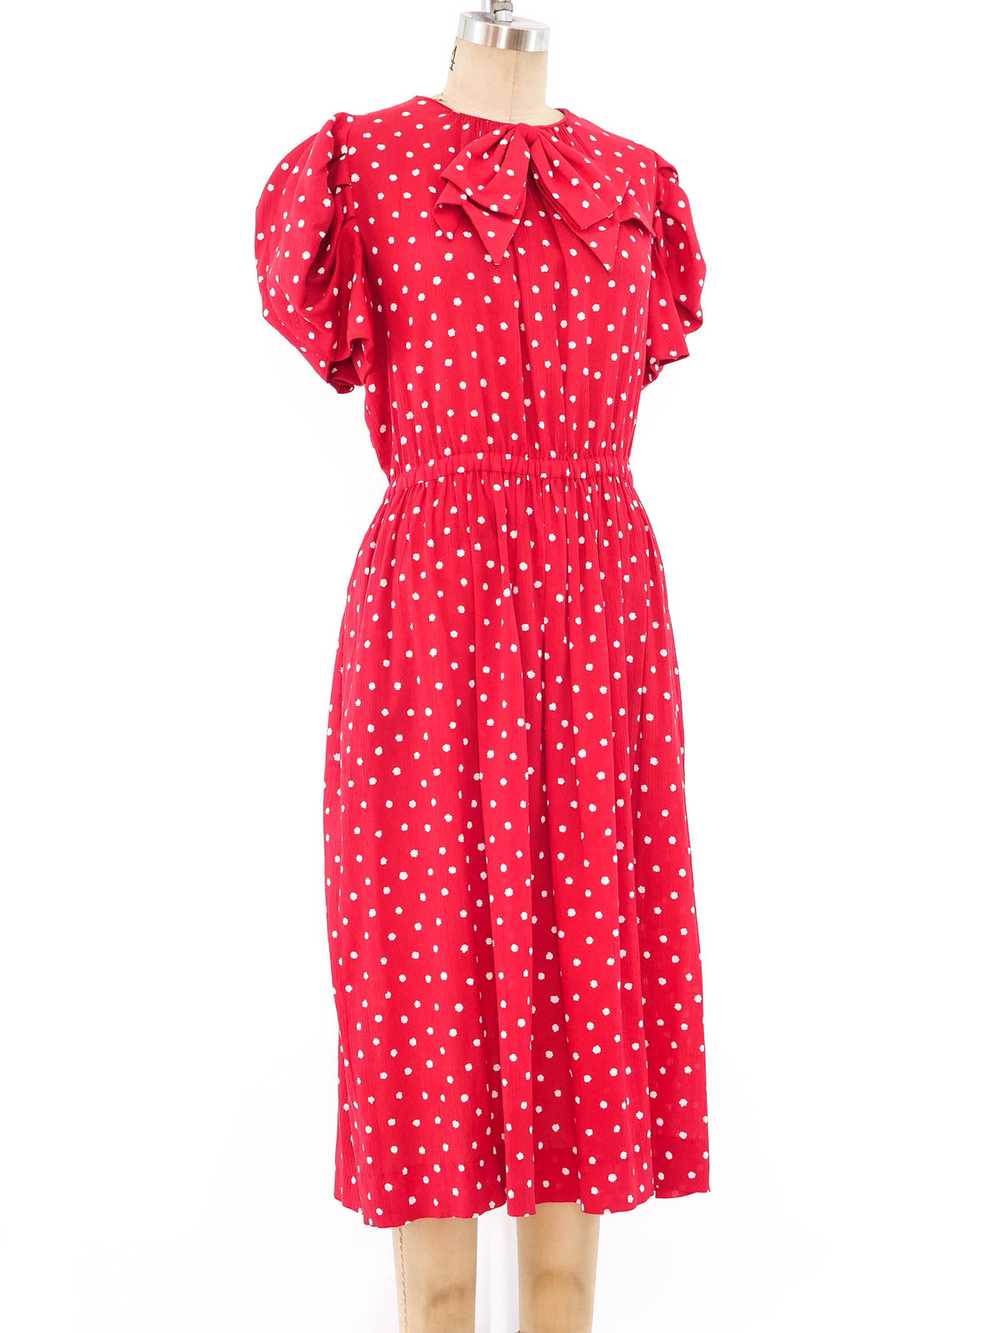 Jean Patou Dotted Red Dress - image 3